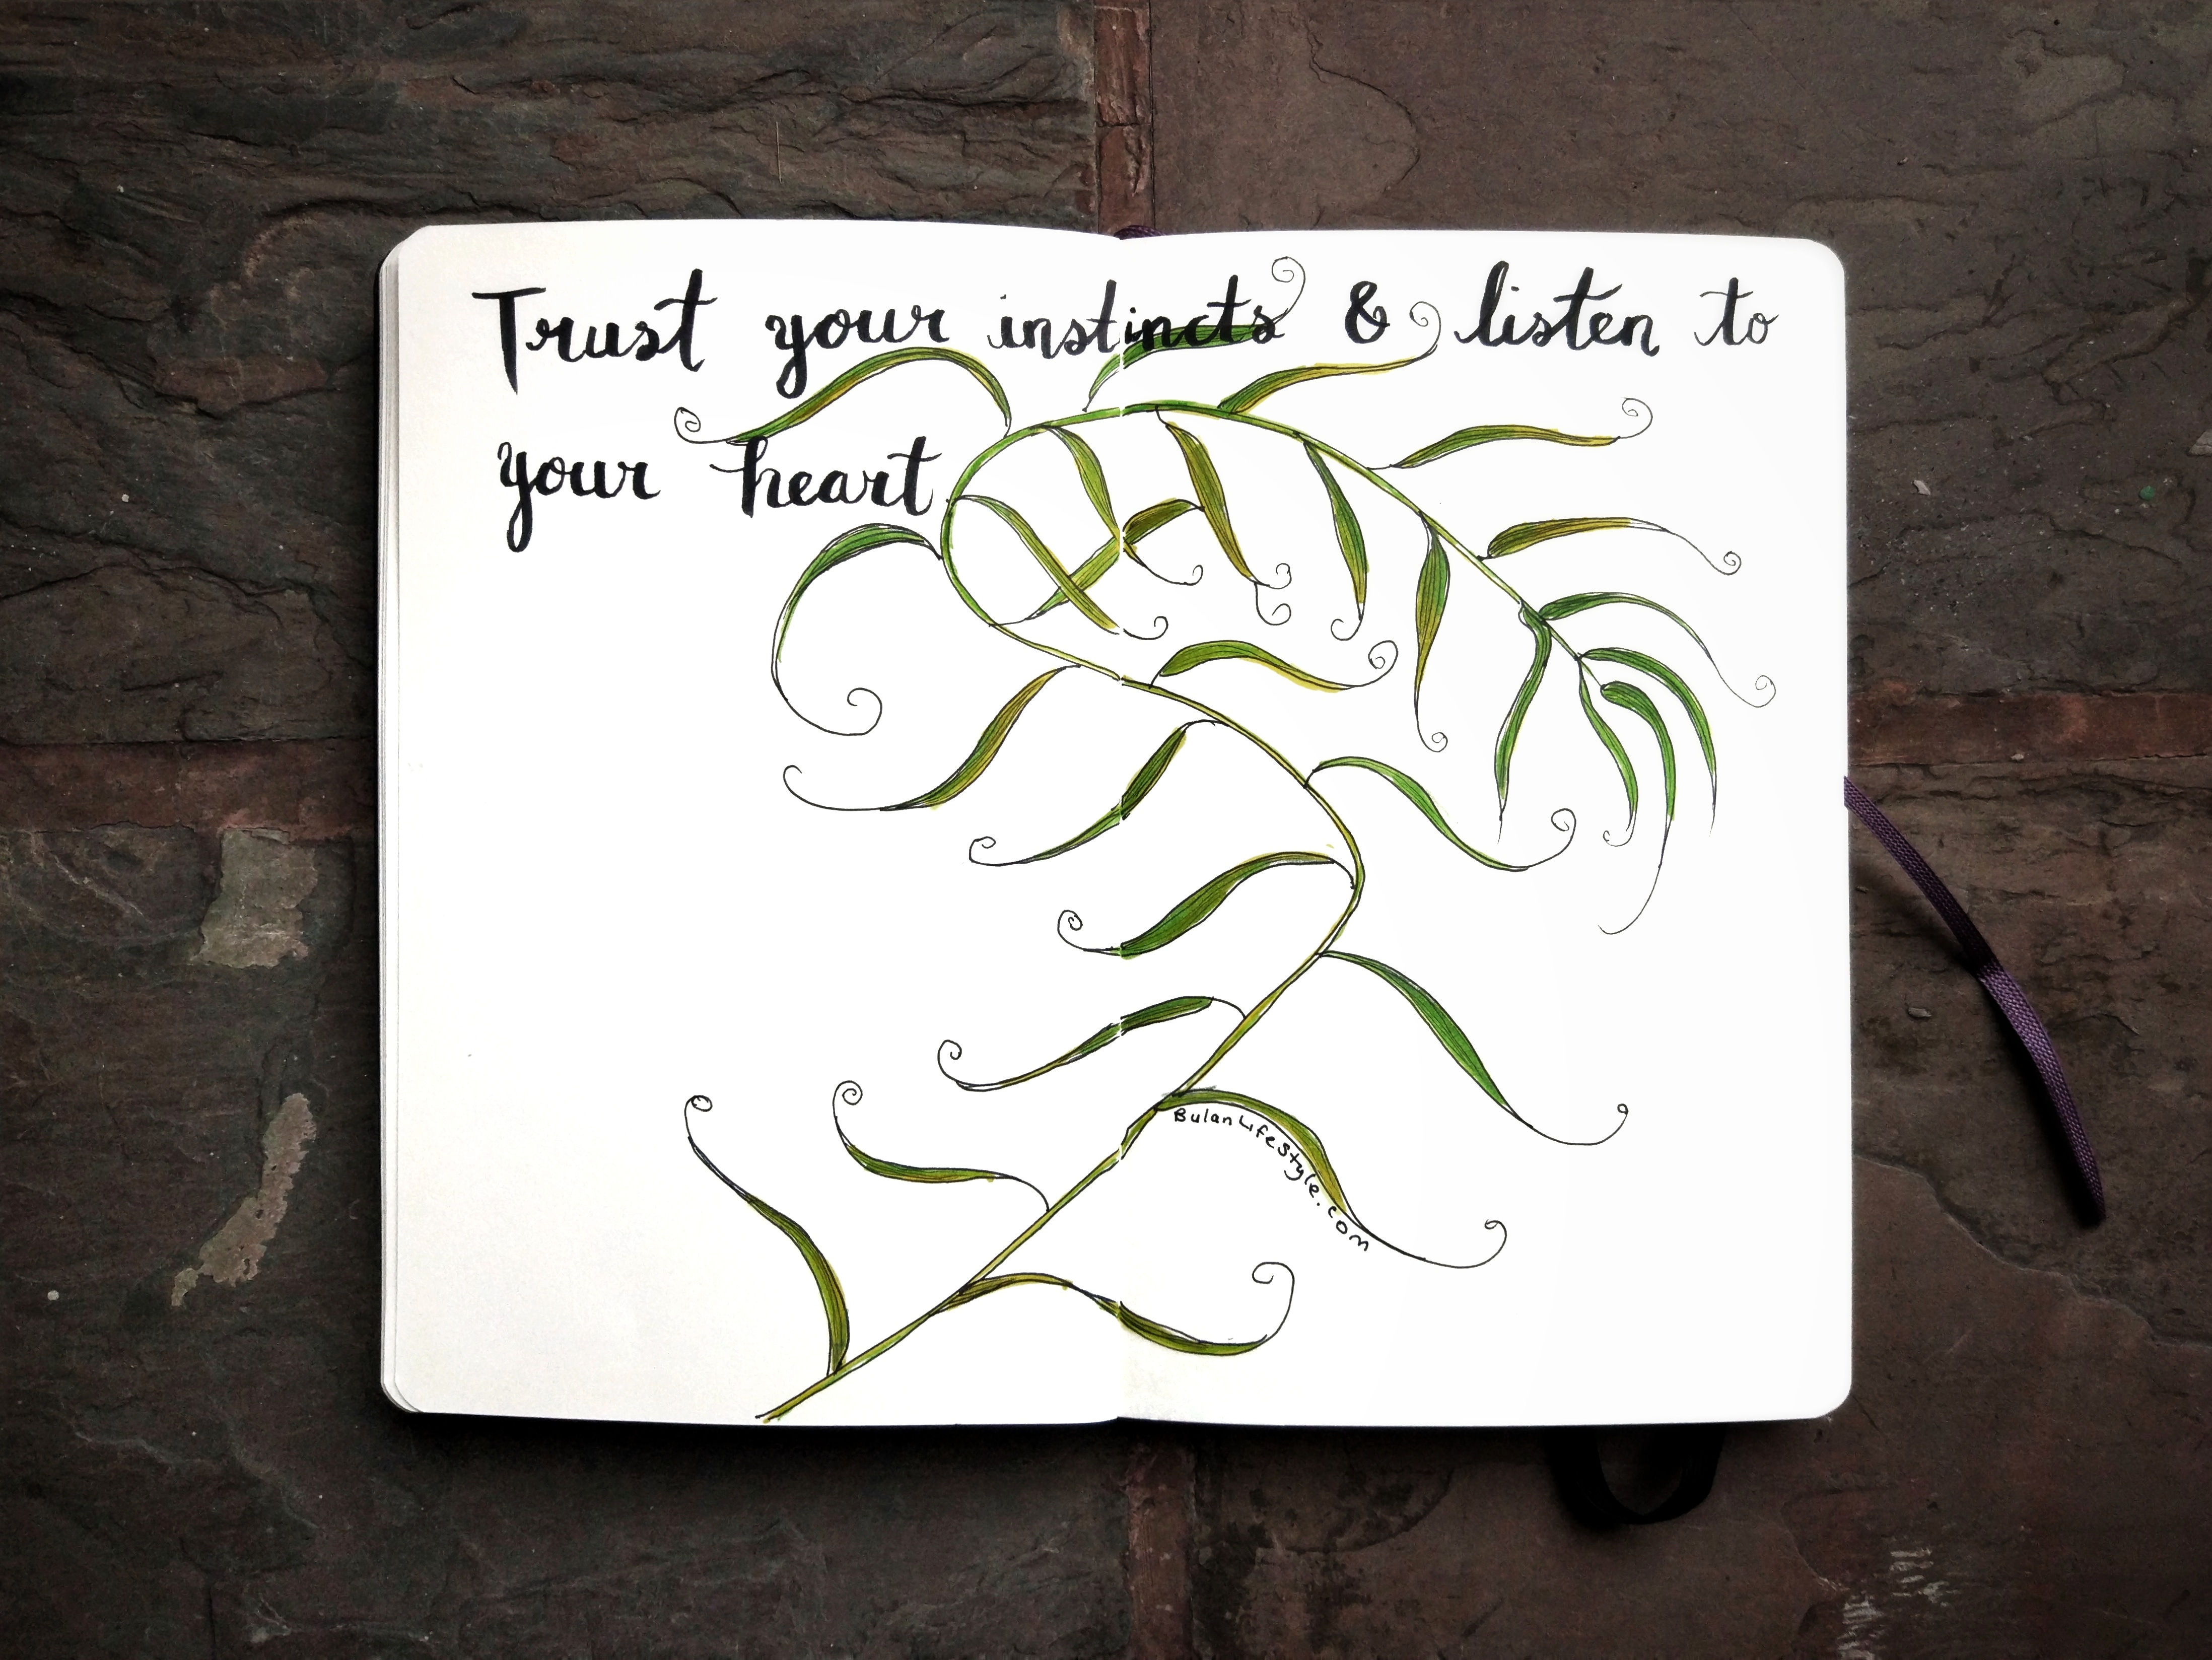 Trust your instincts and listen to your heart.